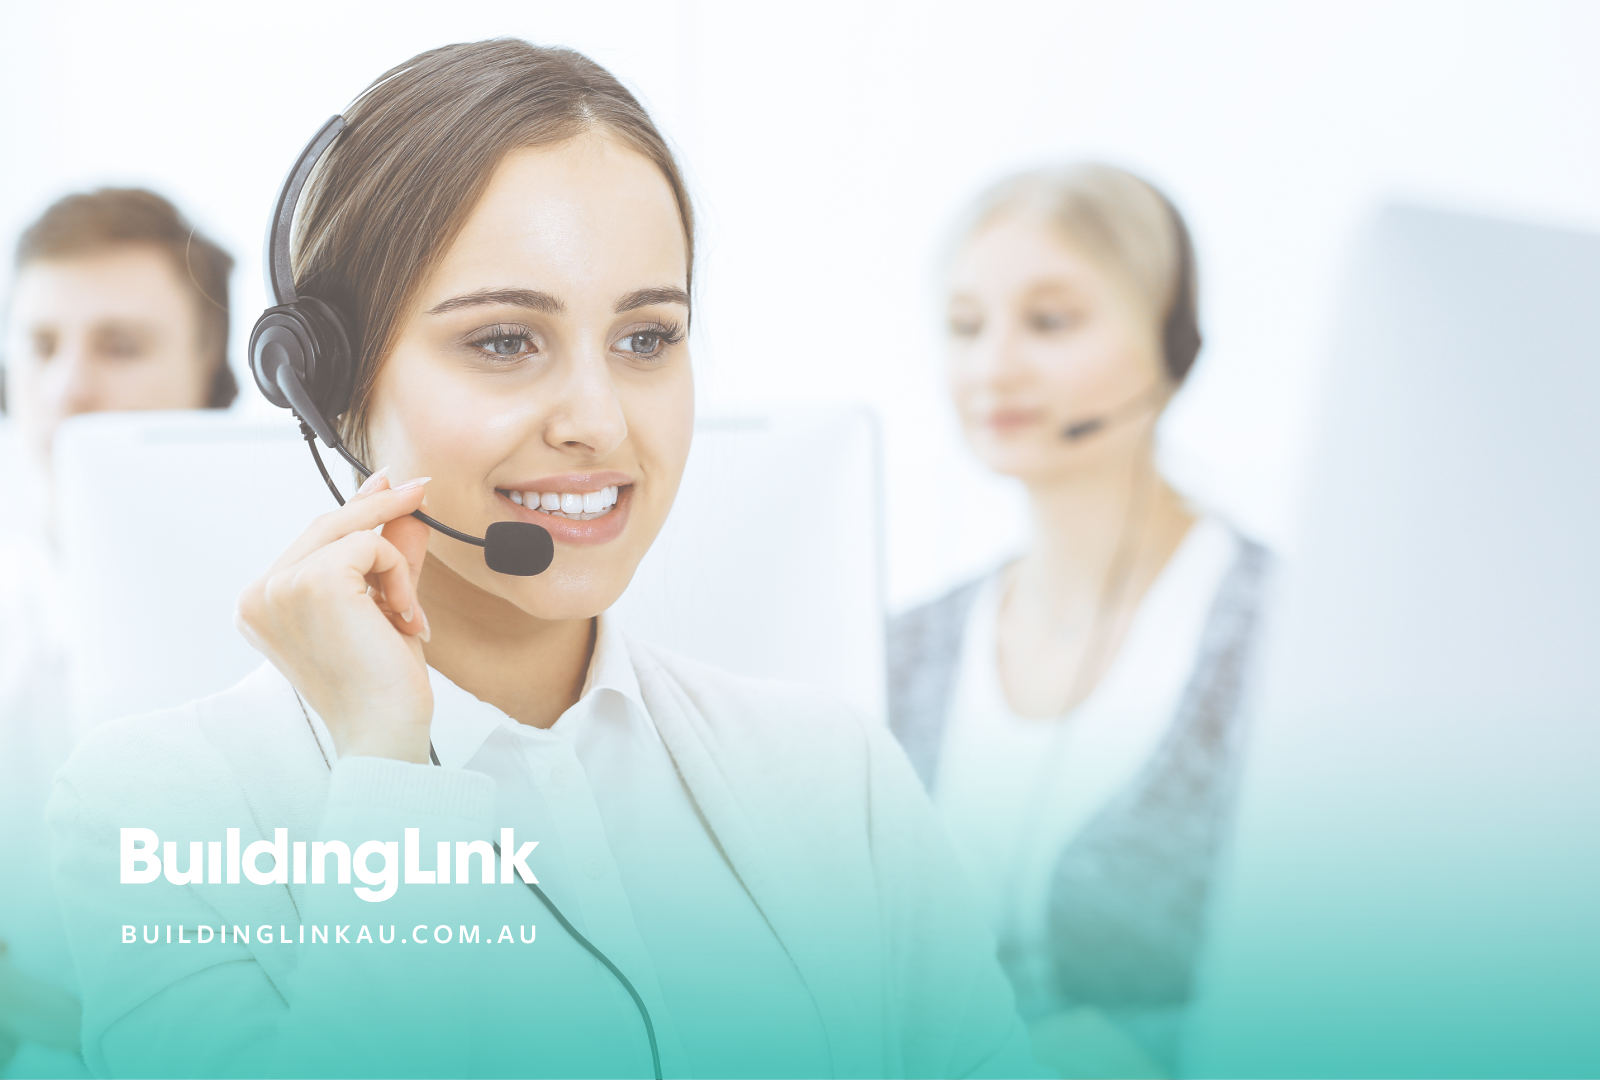 Building management software support worker providing support over the phone